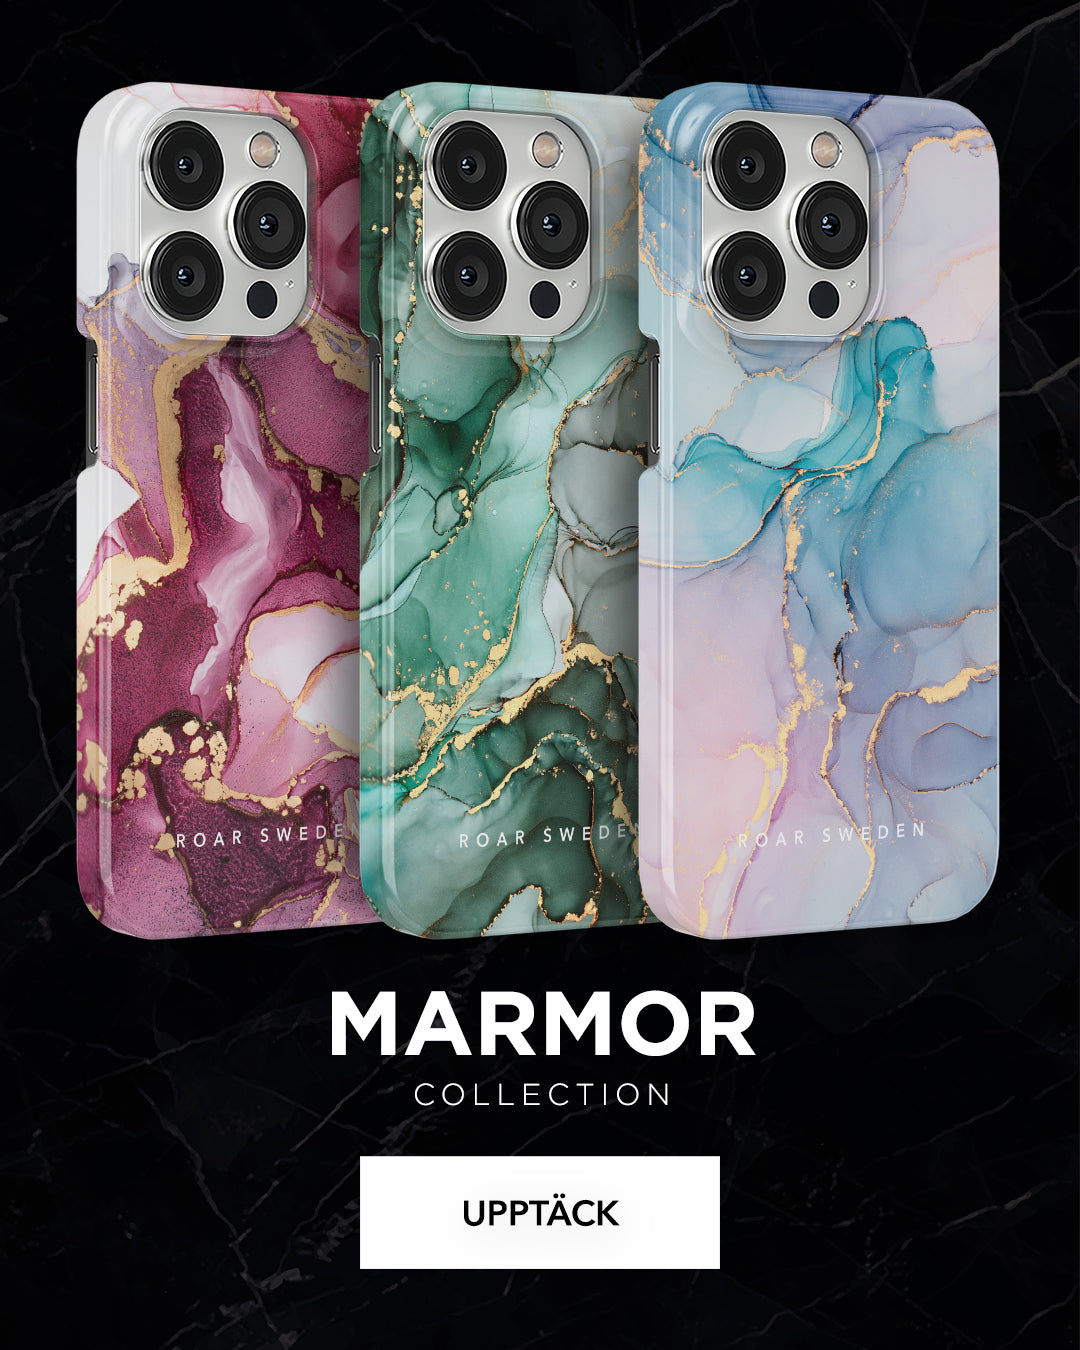 Four smartphones with artistic, marbled cases in various colors, showcased against a dark, textured background. text labels them as part of the "marmor collection" by upptäck.